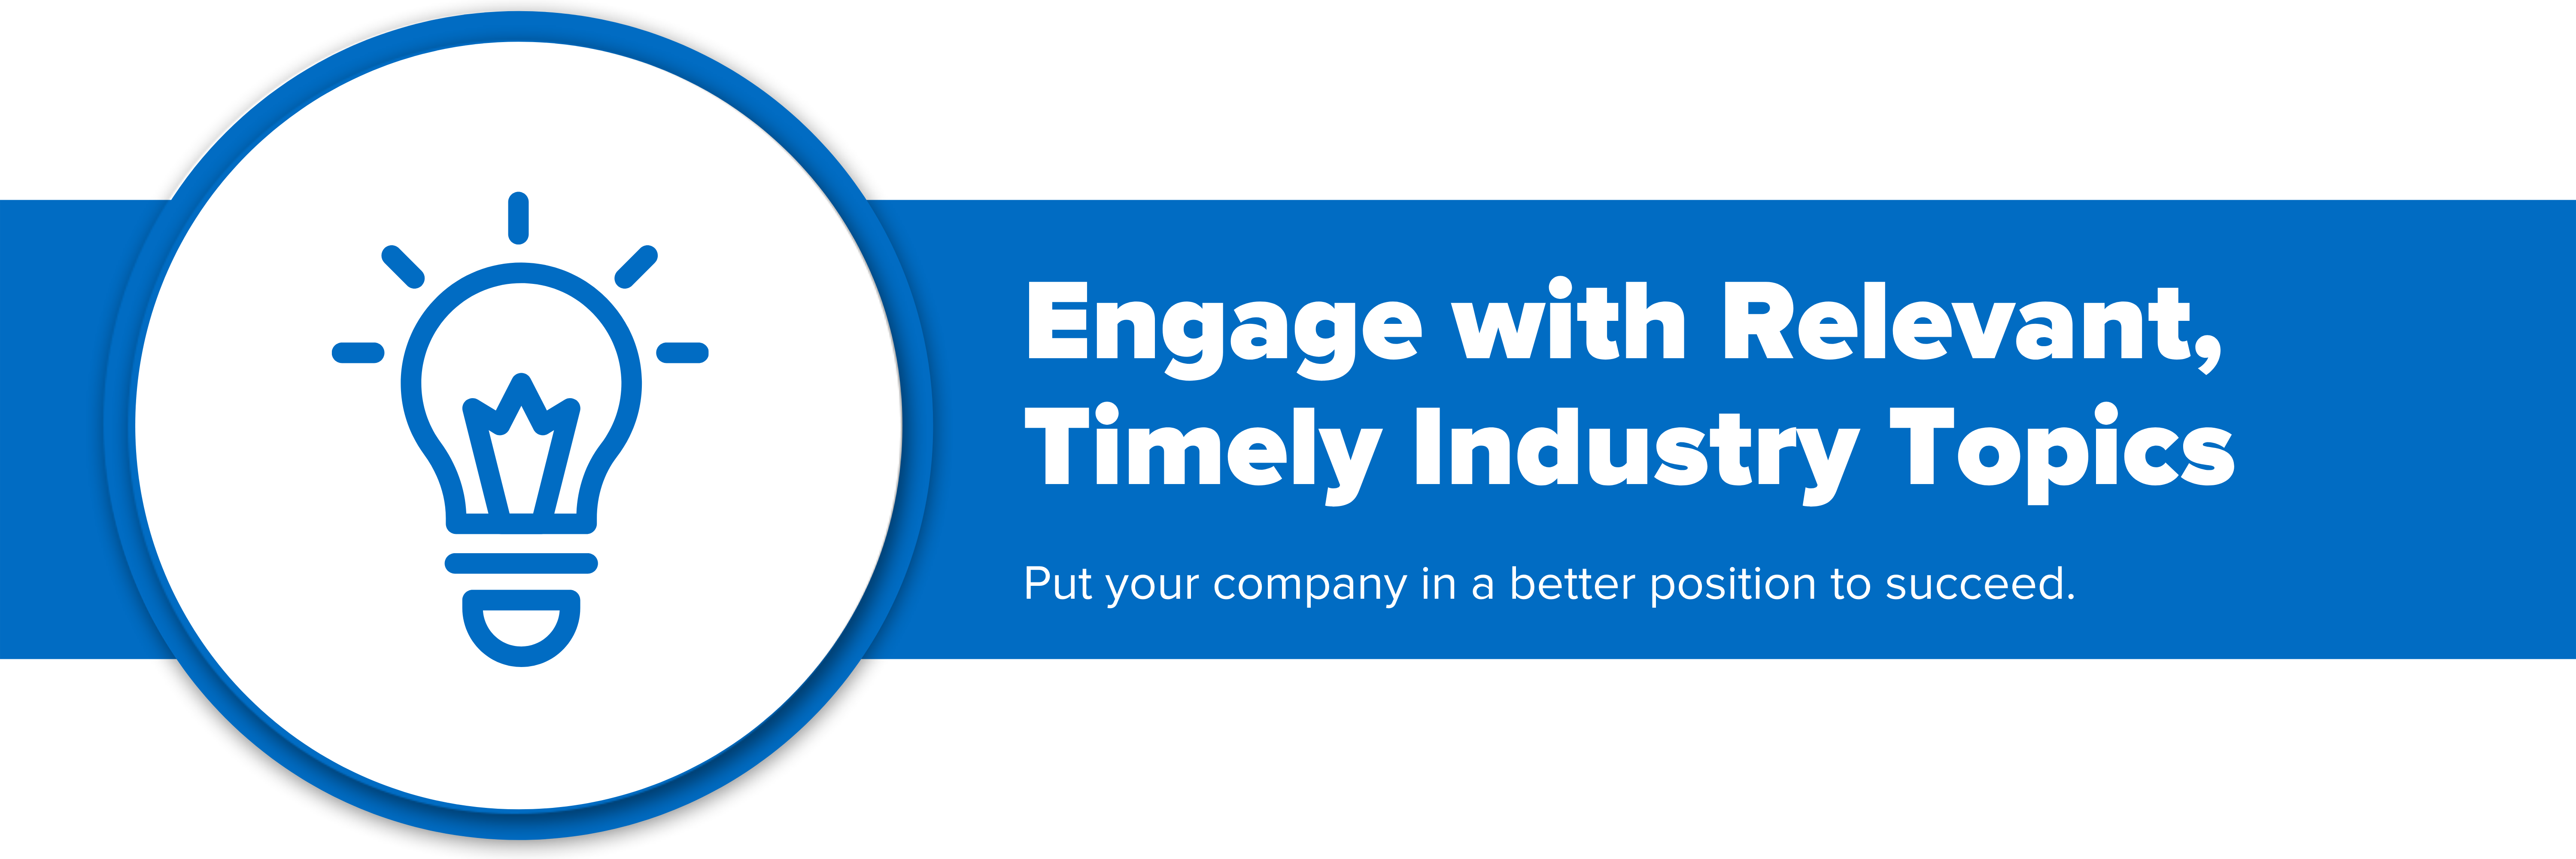 Header image with text "Engage with Relevant, Timely Industry Topics"